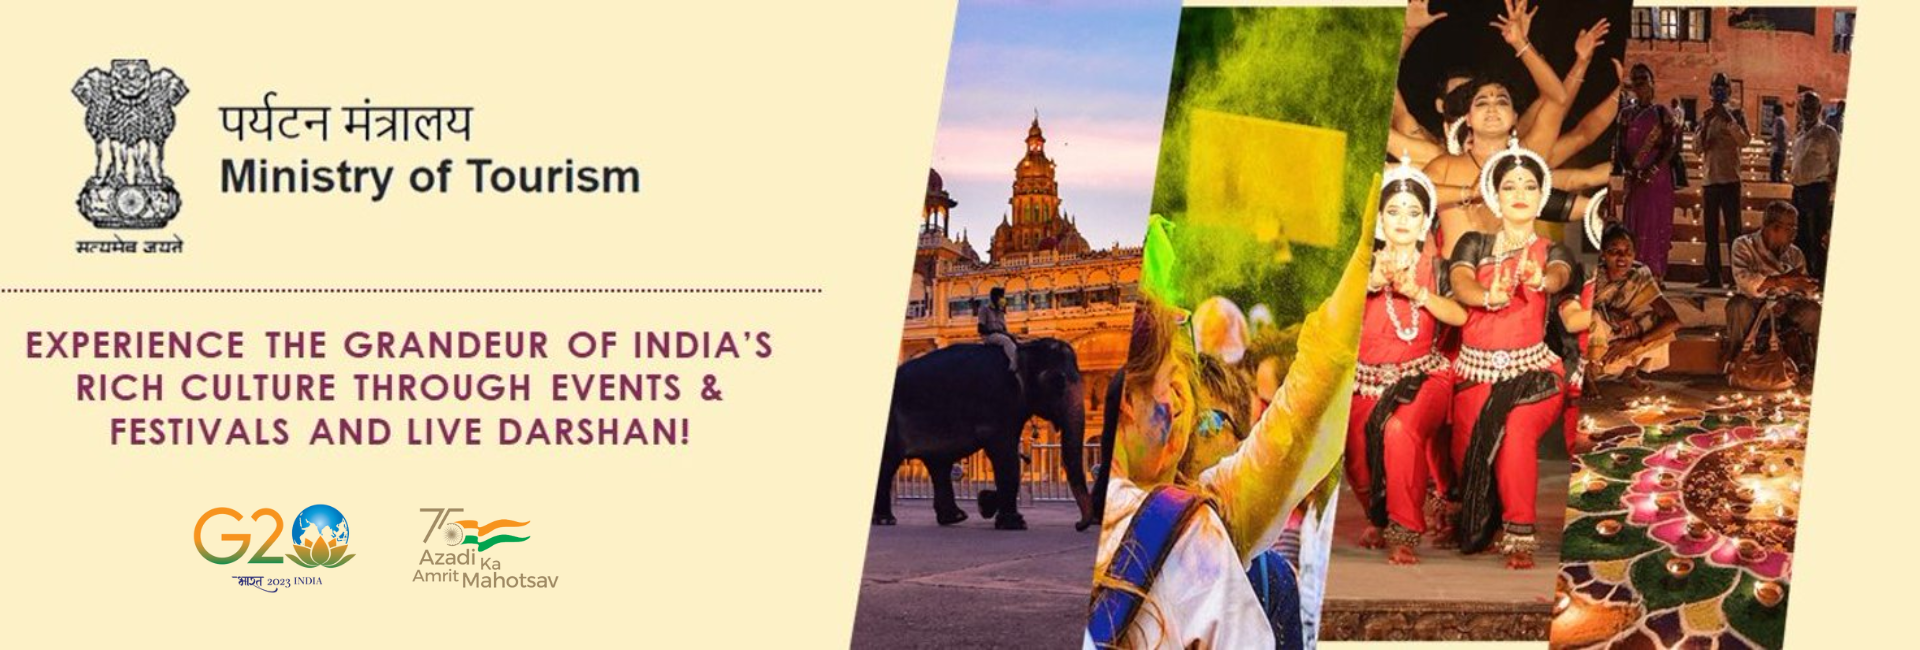 Events & Festivals in India  A Ministry of Tourism Initiative